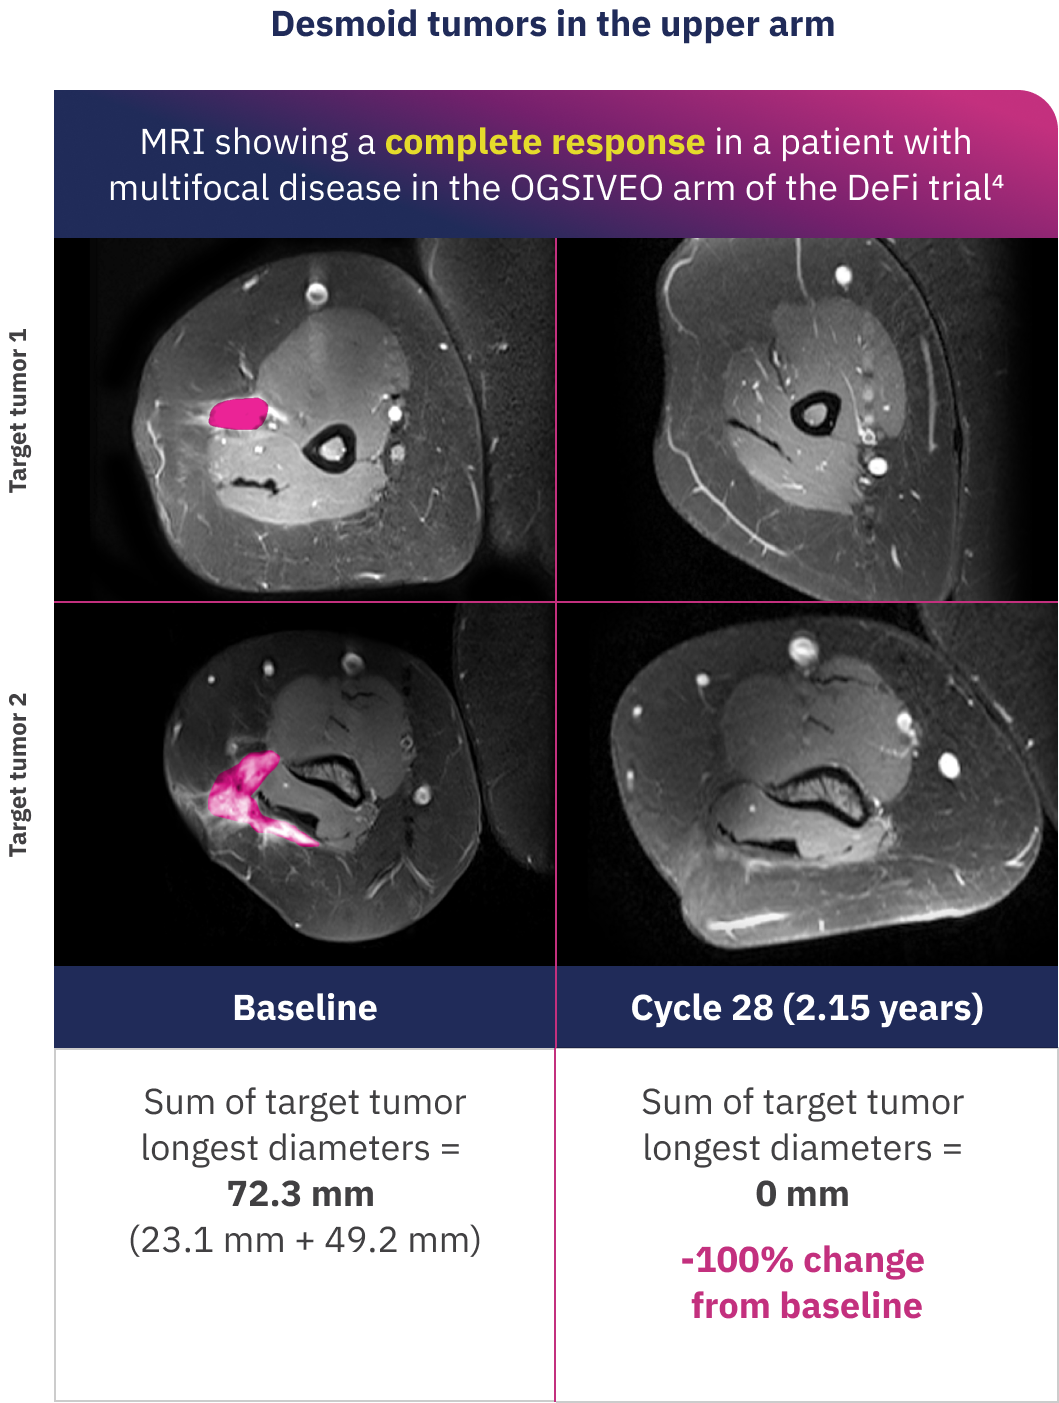 MRI showing a complete response in a patient with multifocal disease in the OGSIVEO arm of the DeFi trial